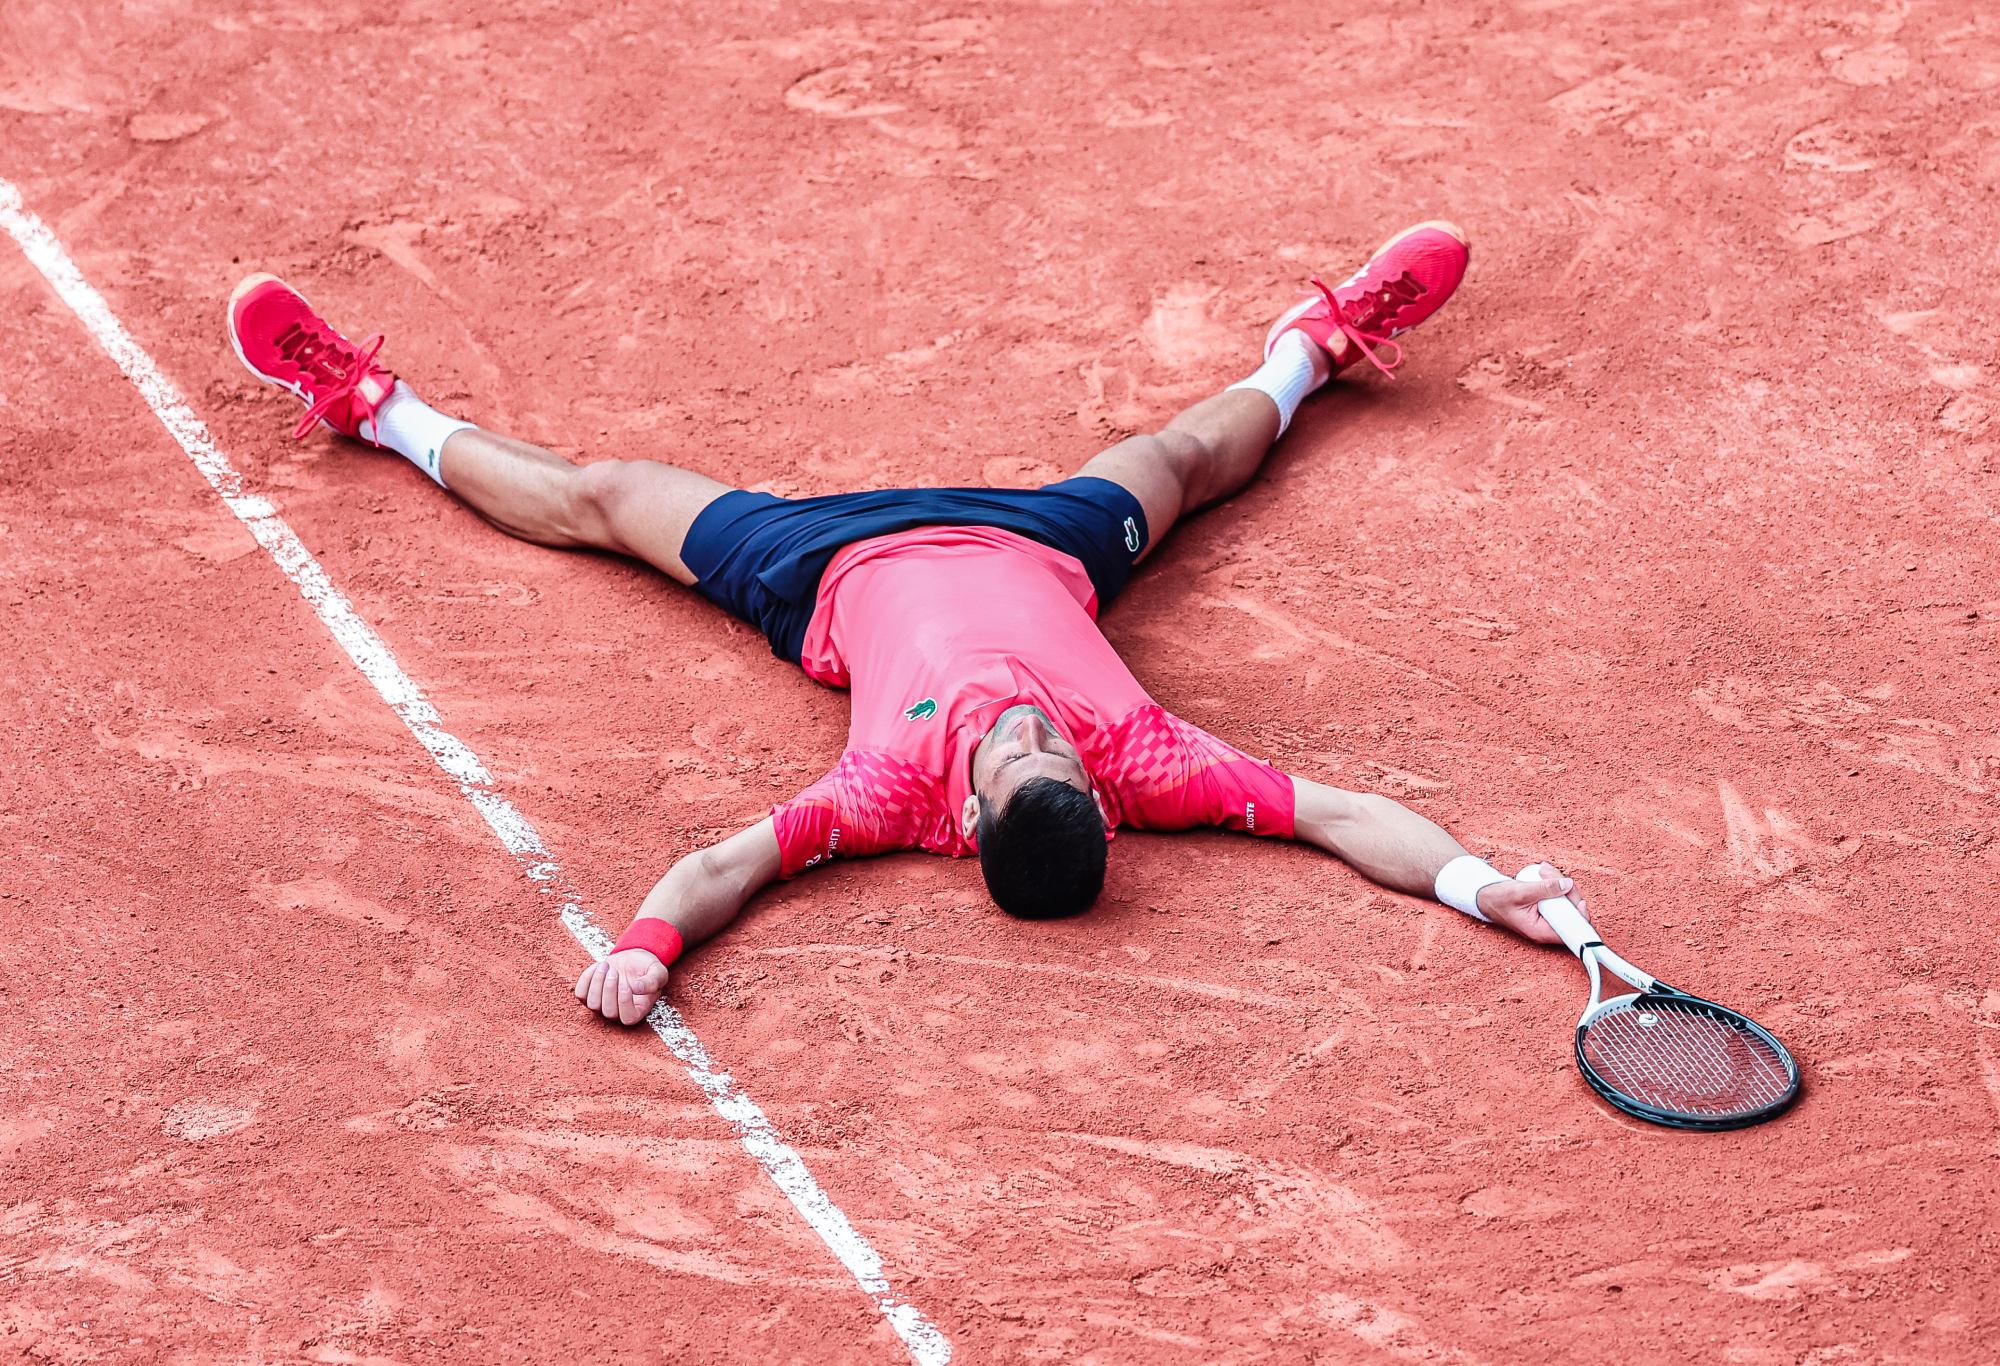 PARIS, FRANCE - JUNE 11: Novak Djokovic of Serbia celebrates after winning against Casper Ruud of Norway during the Men's Single Final on Day Fifteen of the 2023 French Open at Roland Garros on June 11, 2023 in Paris, France. (Photo by Eurasia Sport Images/Getty Images)